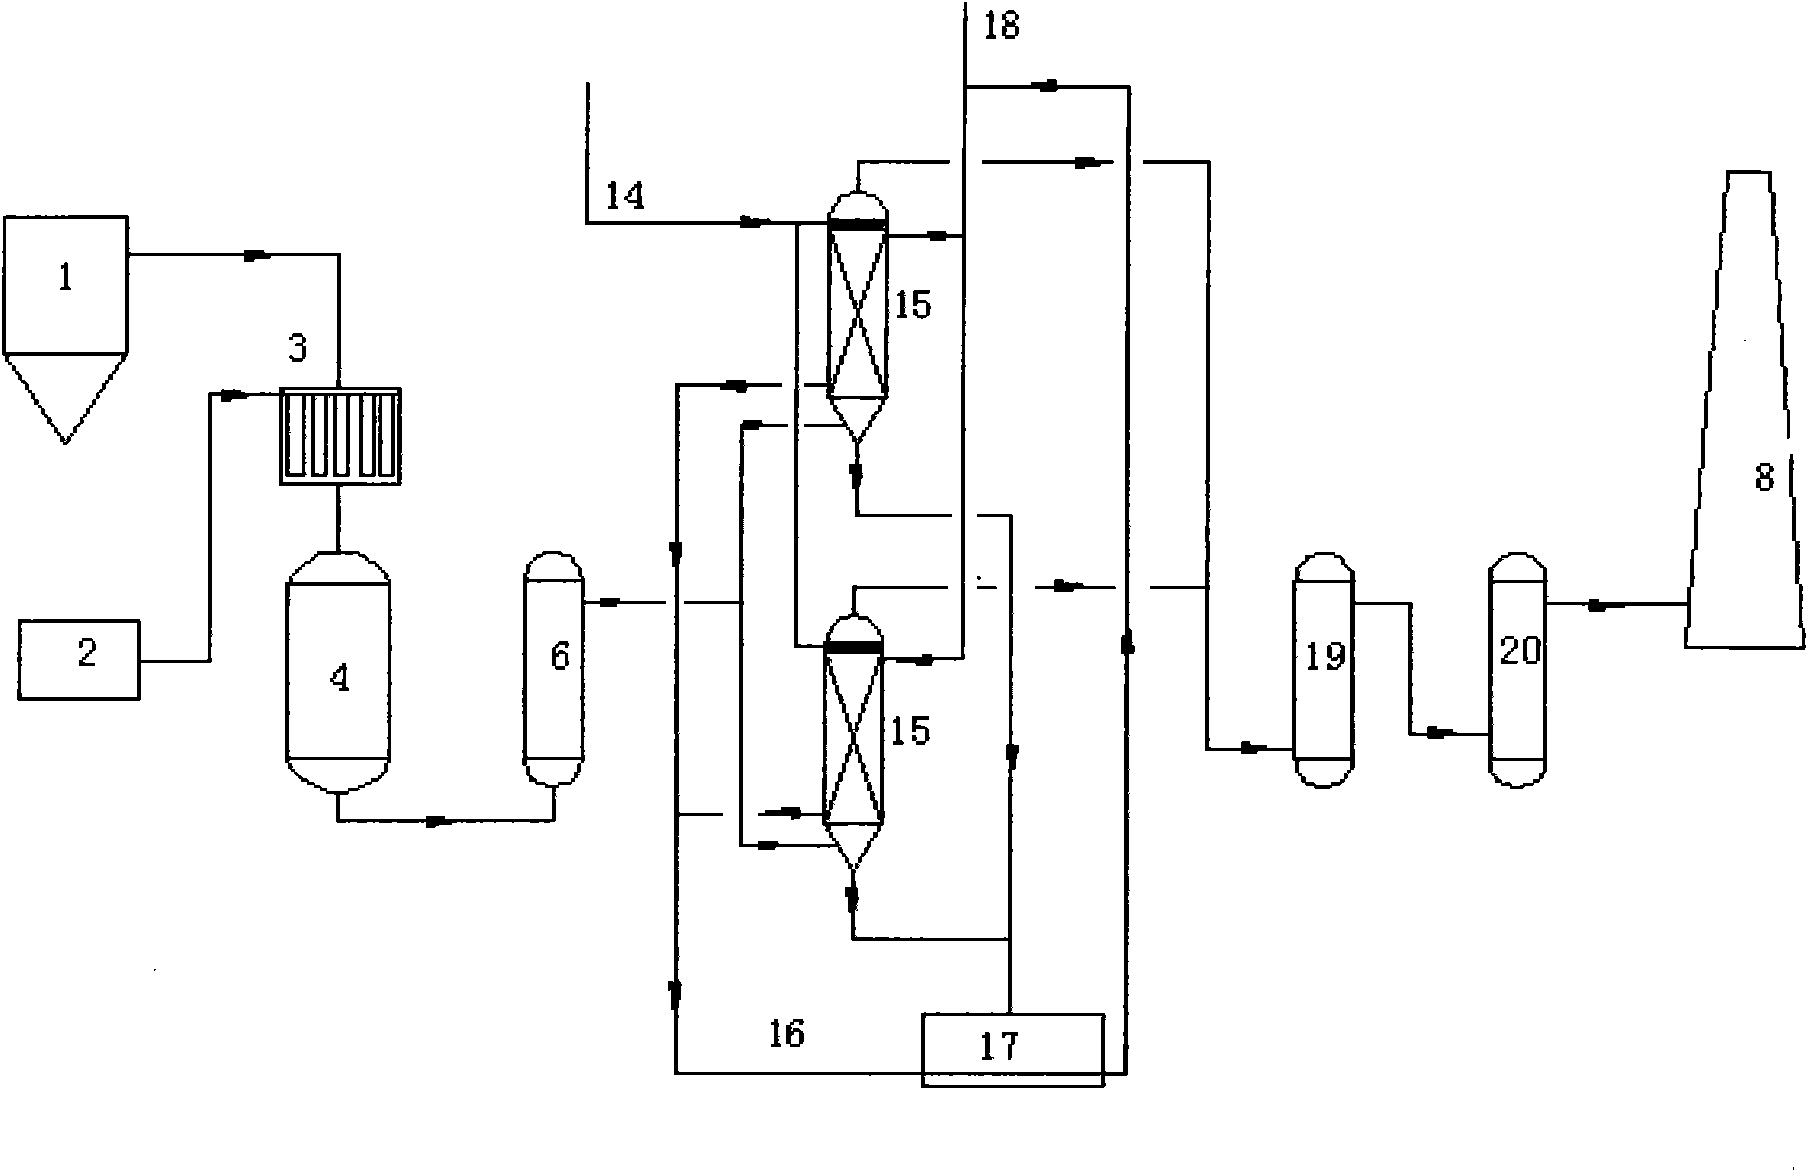 Method for removing NOx and SOx from fluid catalytic cracking (FCC) flue gas